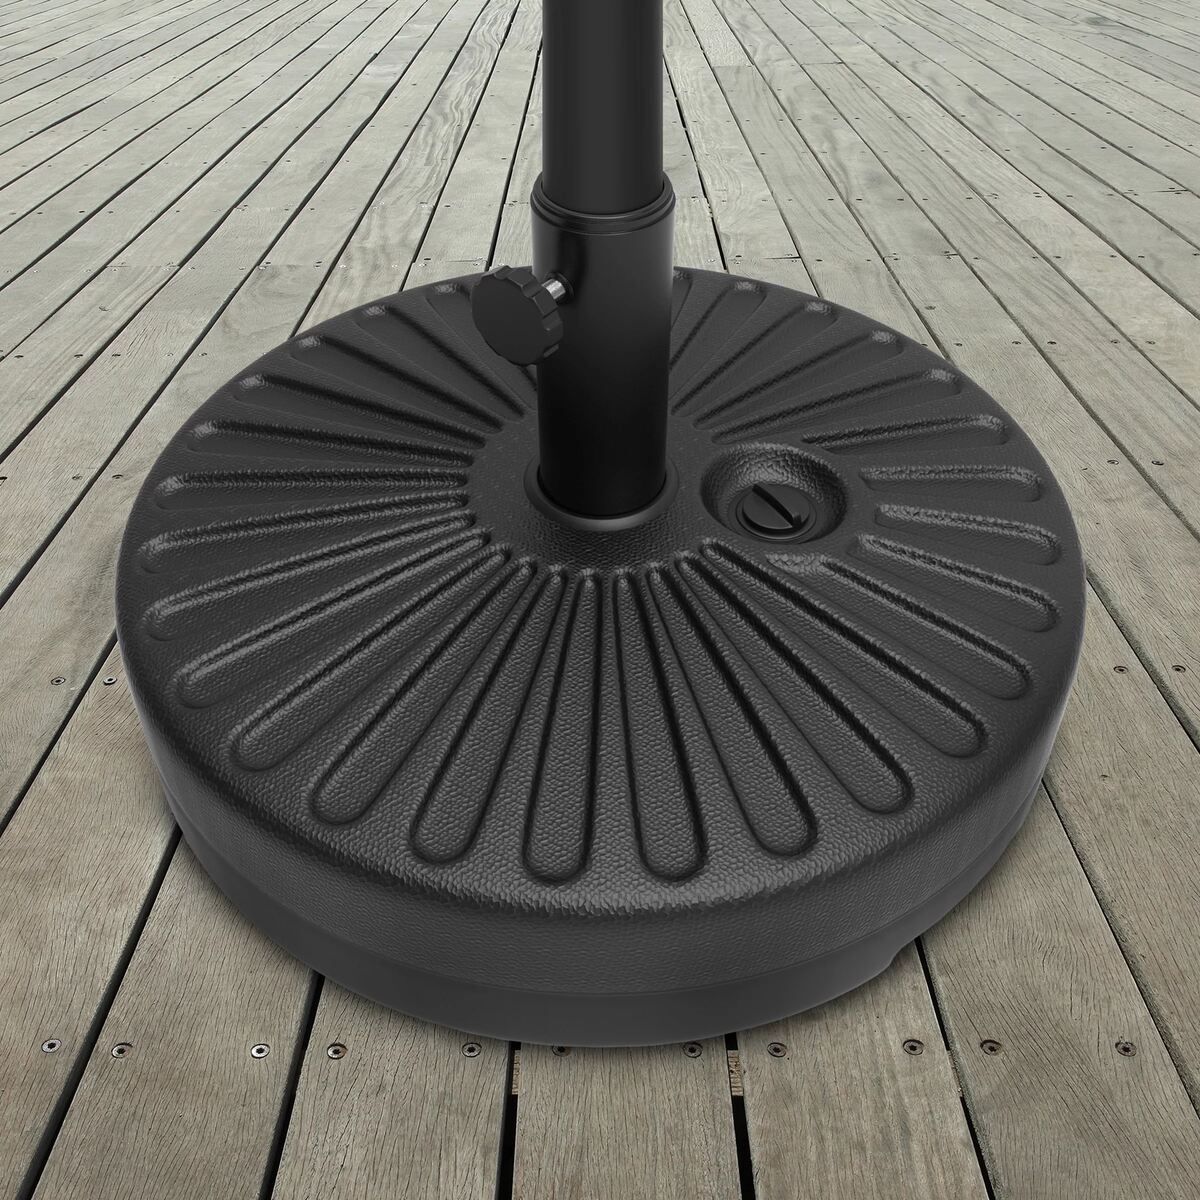 How Much Weight For Patio Umbrella Base